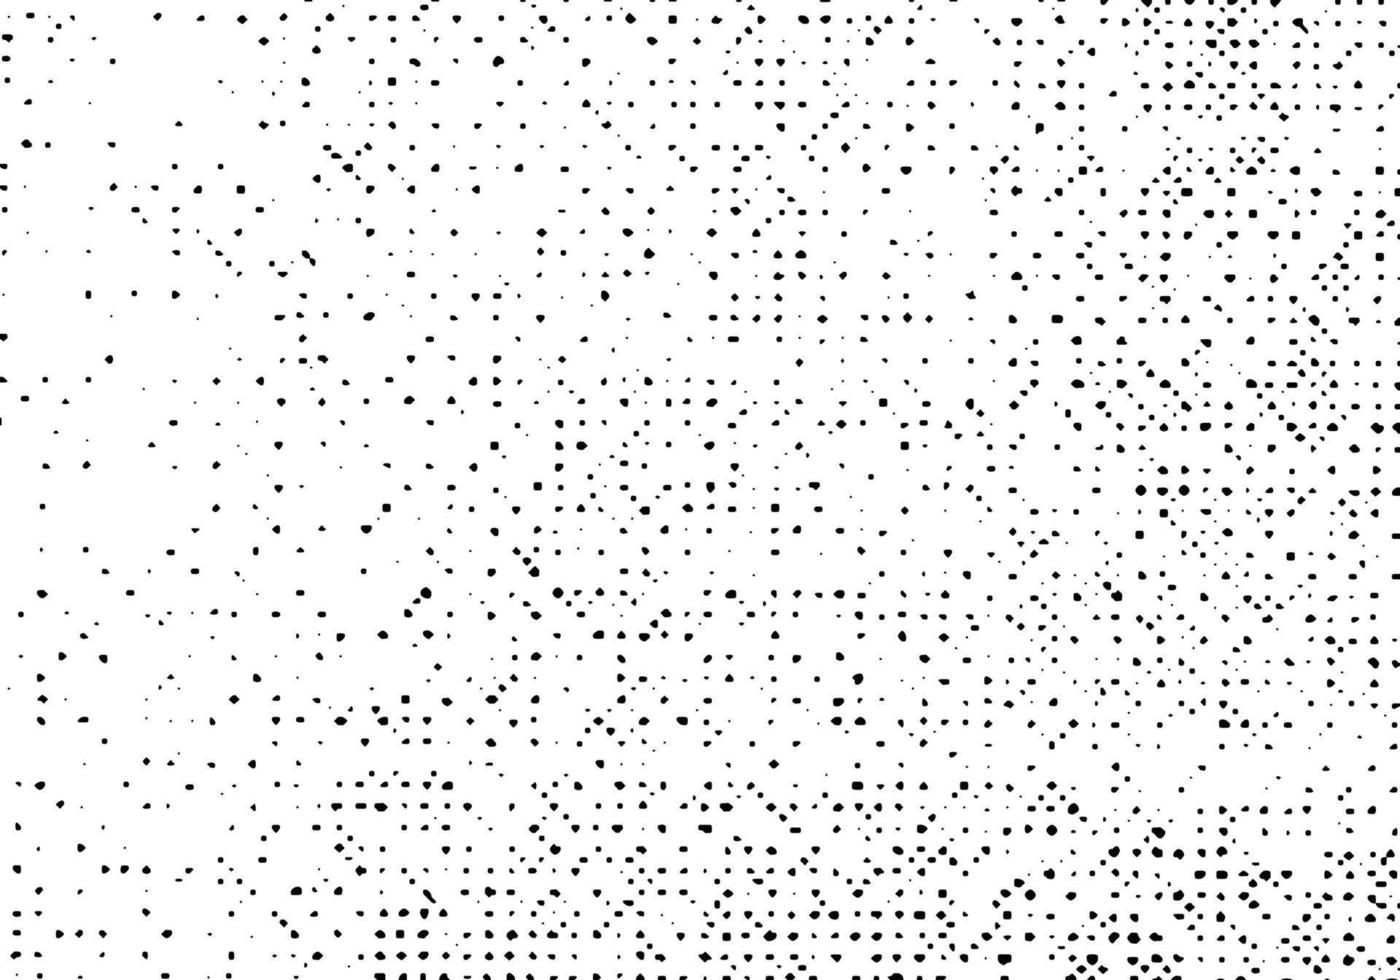 Pattern grunge background, Old distress texture  overlay vector, Print halftone dot monochrome vector